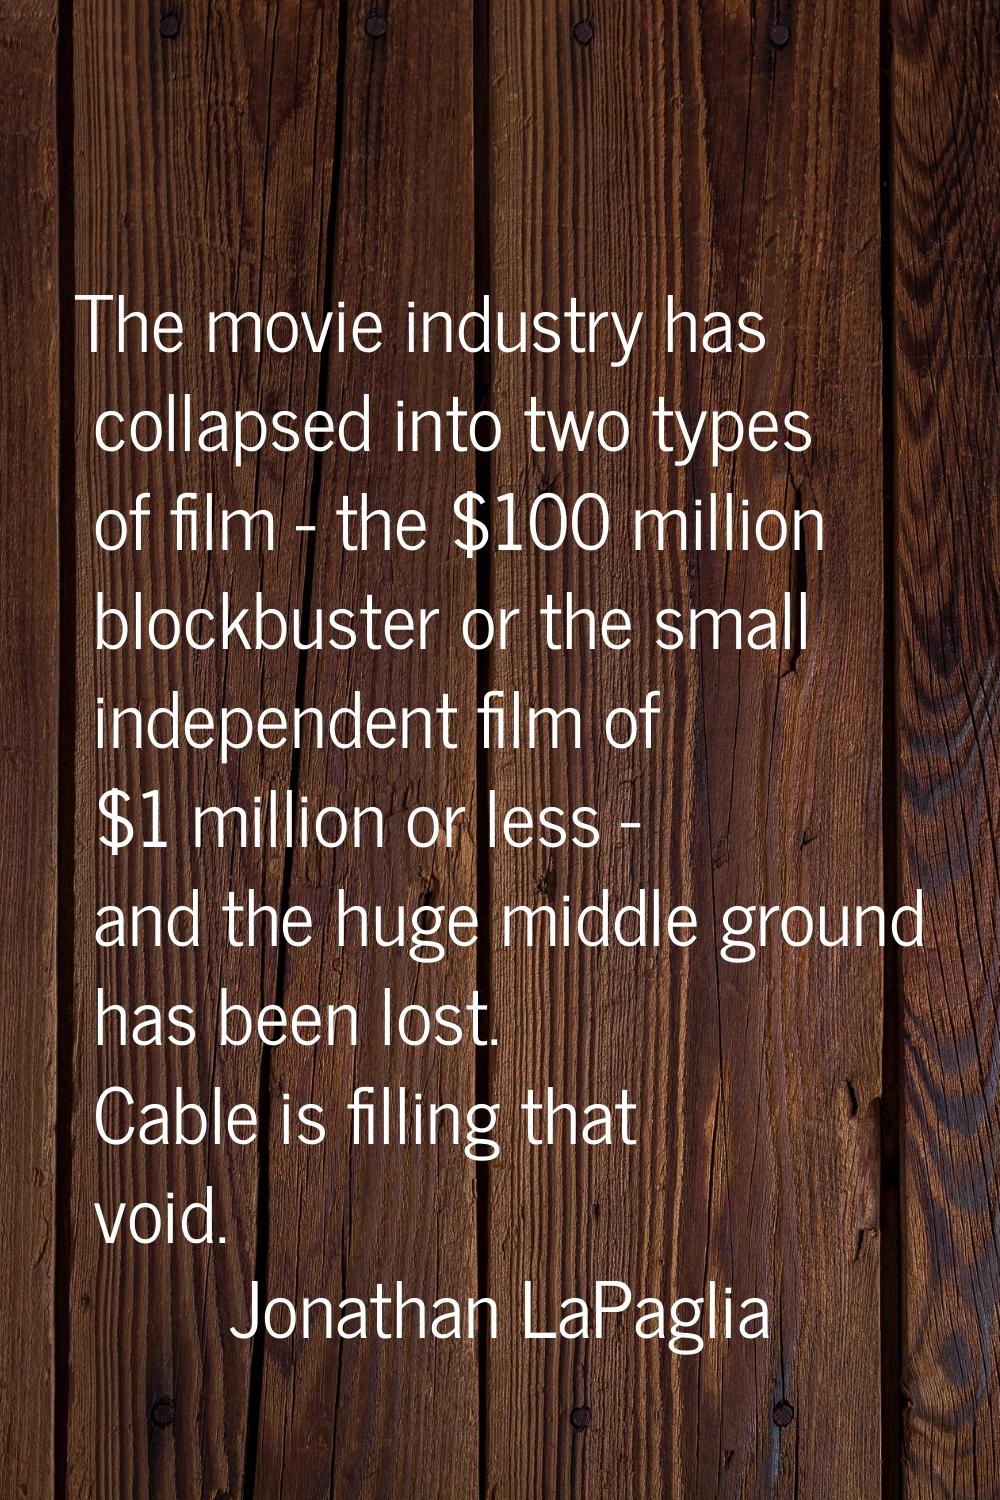 The movie industry has collapsed into two types of film - the $100 million blockbuster or the small